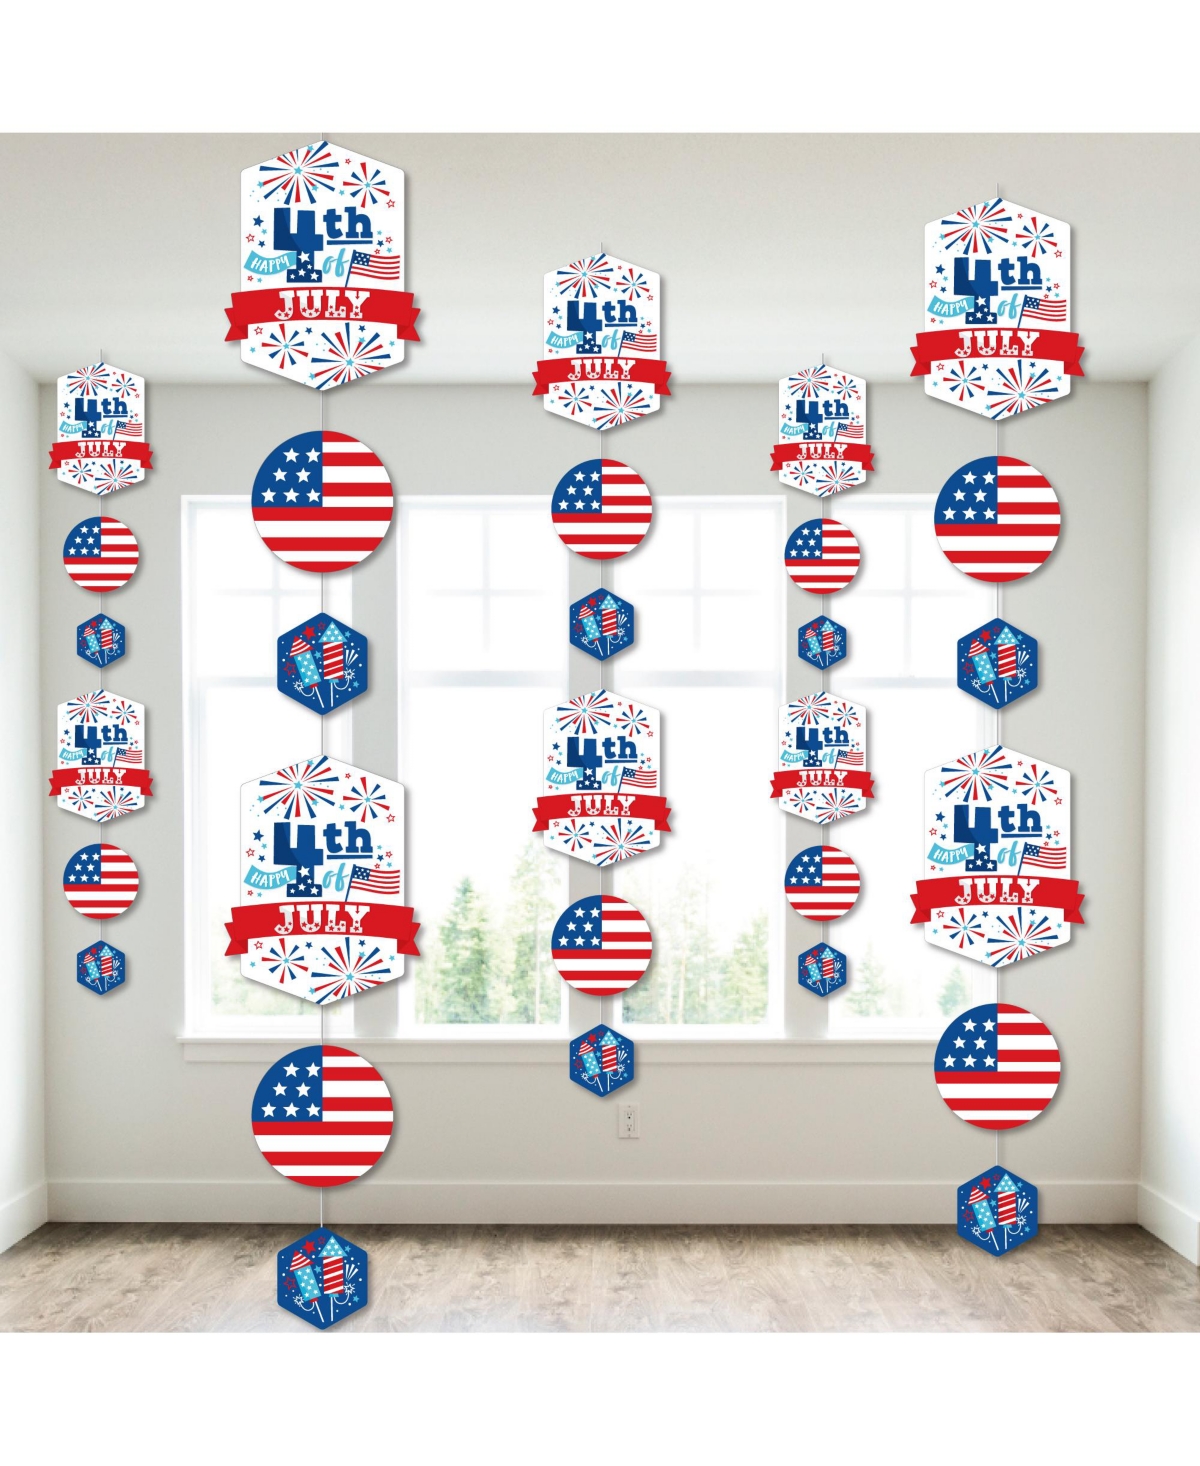 Firecracker 4th of July - Party Backdrop - Hanging Vertical Decorations - 30 Pc